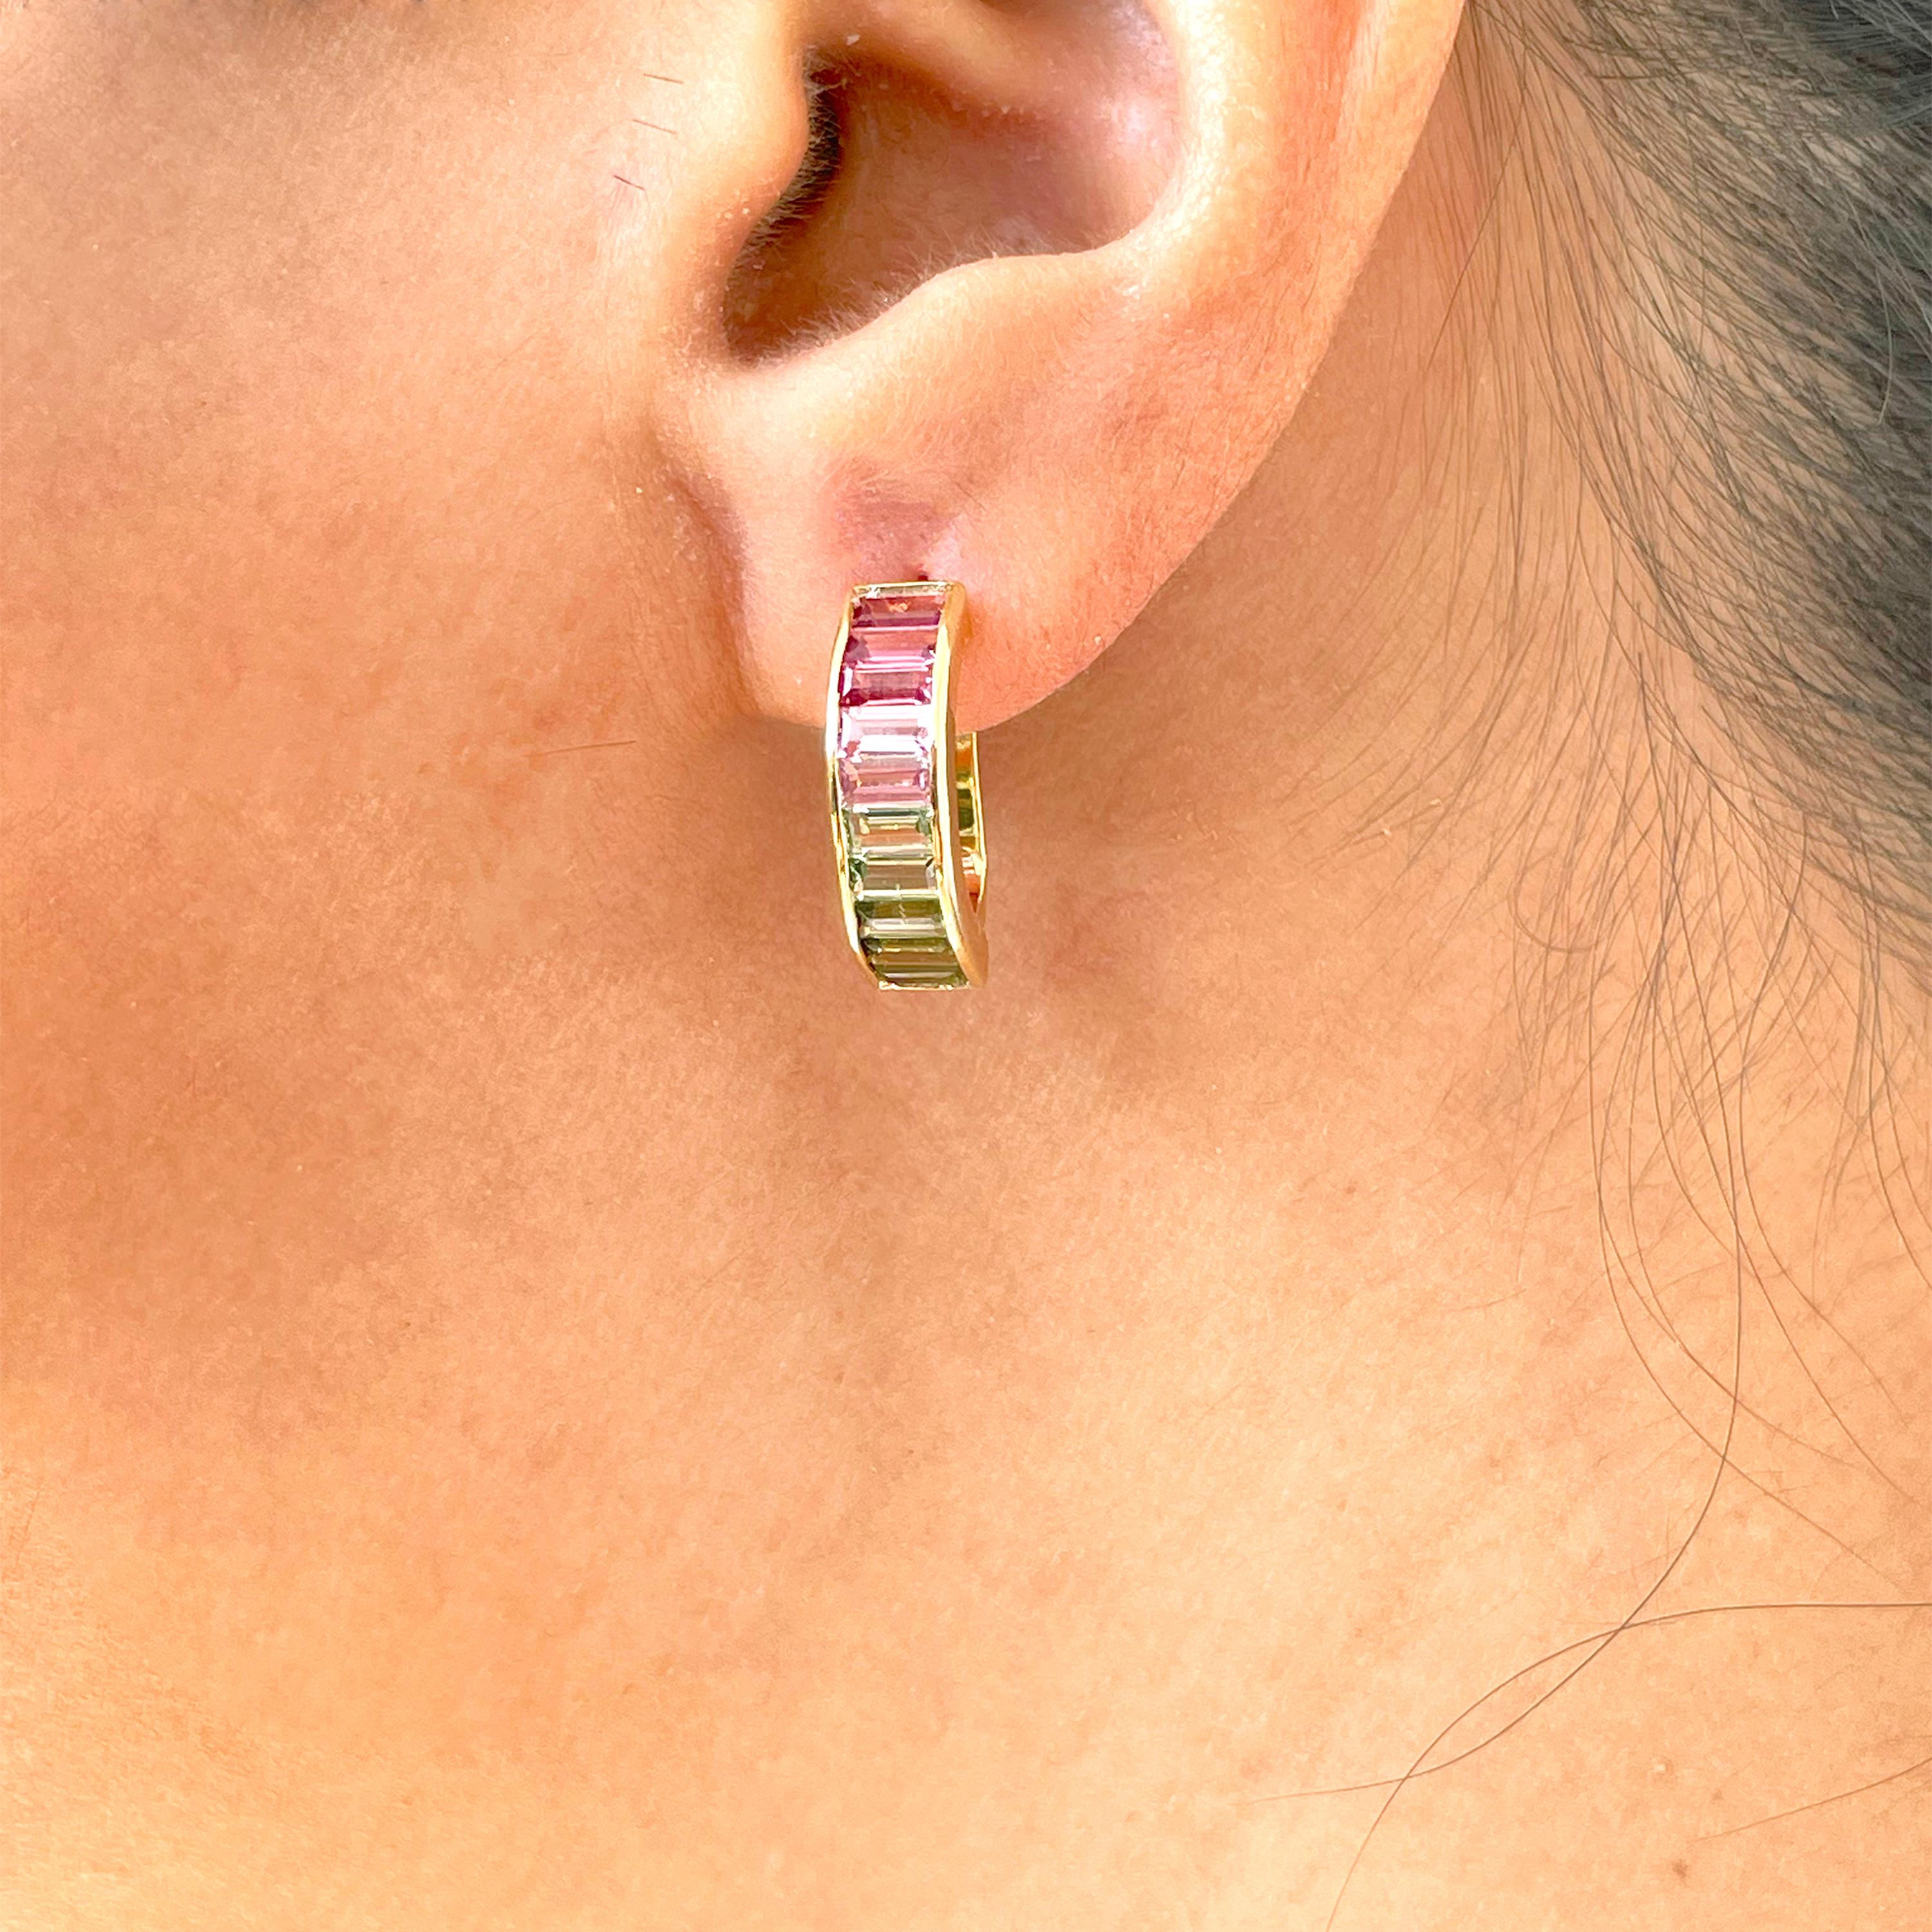 18 karat yellow gold green pink bi-color tourmaline linear hoop earrings

Add something special to your jewellery box with the unique watermelon bi color tourmaline huggie hoop earrings. Set in 18 karat gold, this classic linear design features